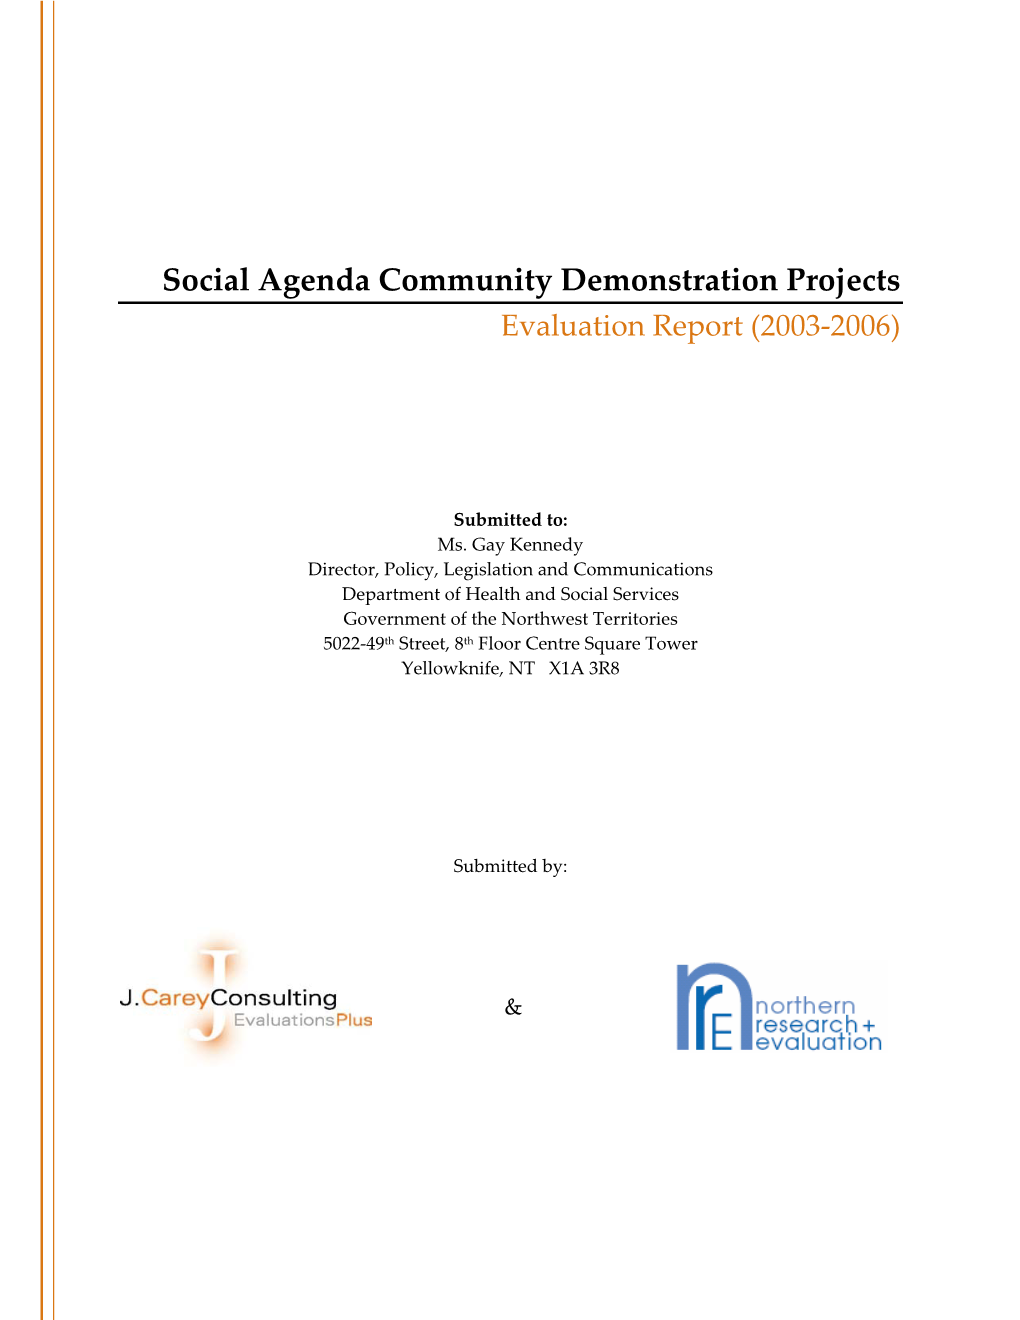 Social Agenda Community Demonstration Projects Evaluation Report (2003-2006)